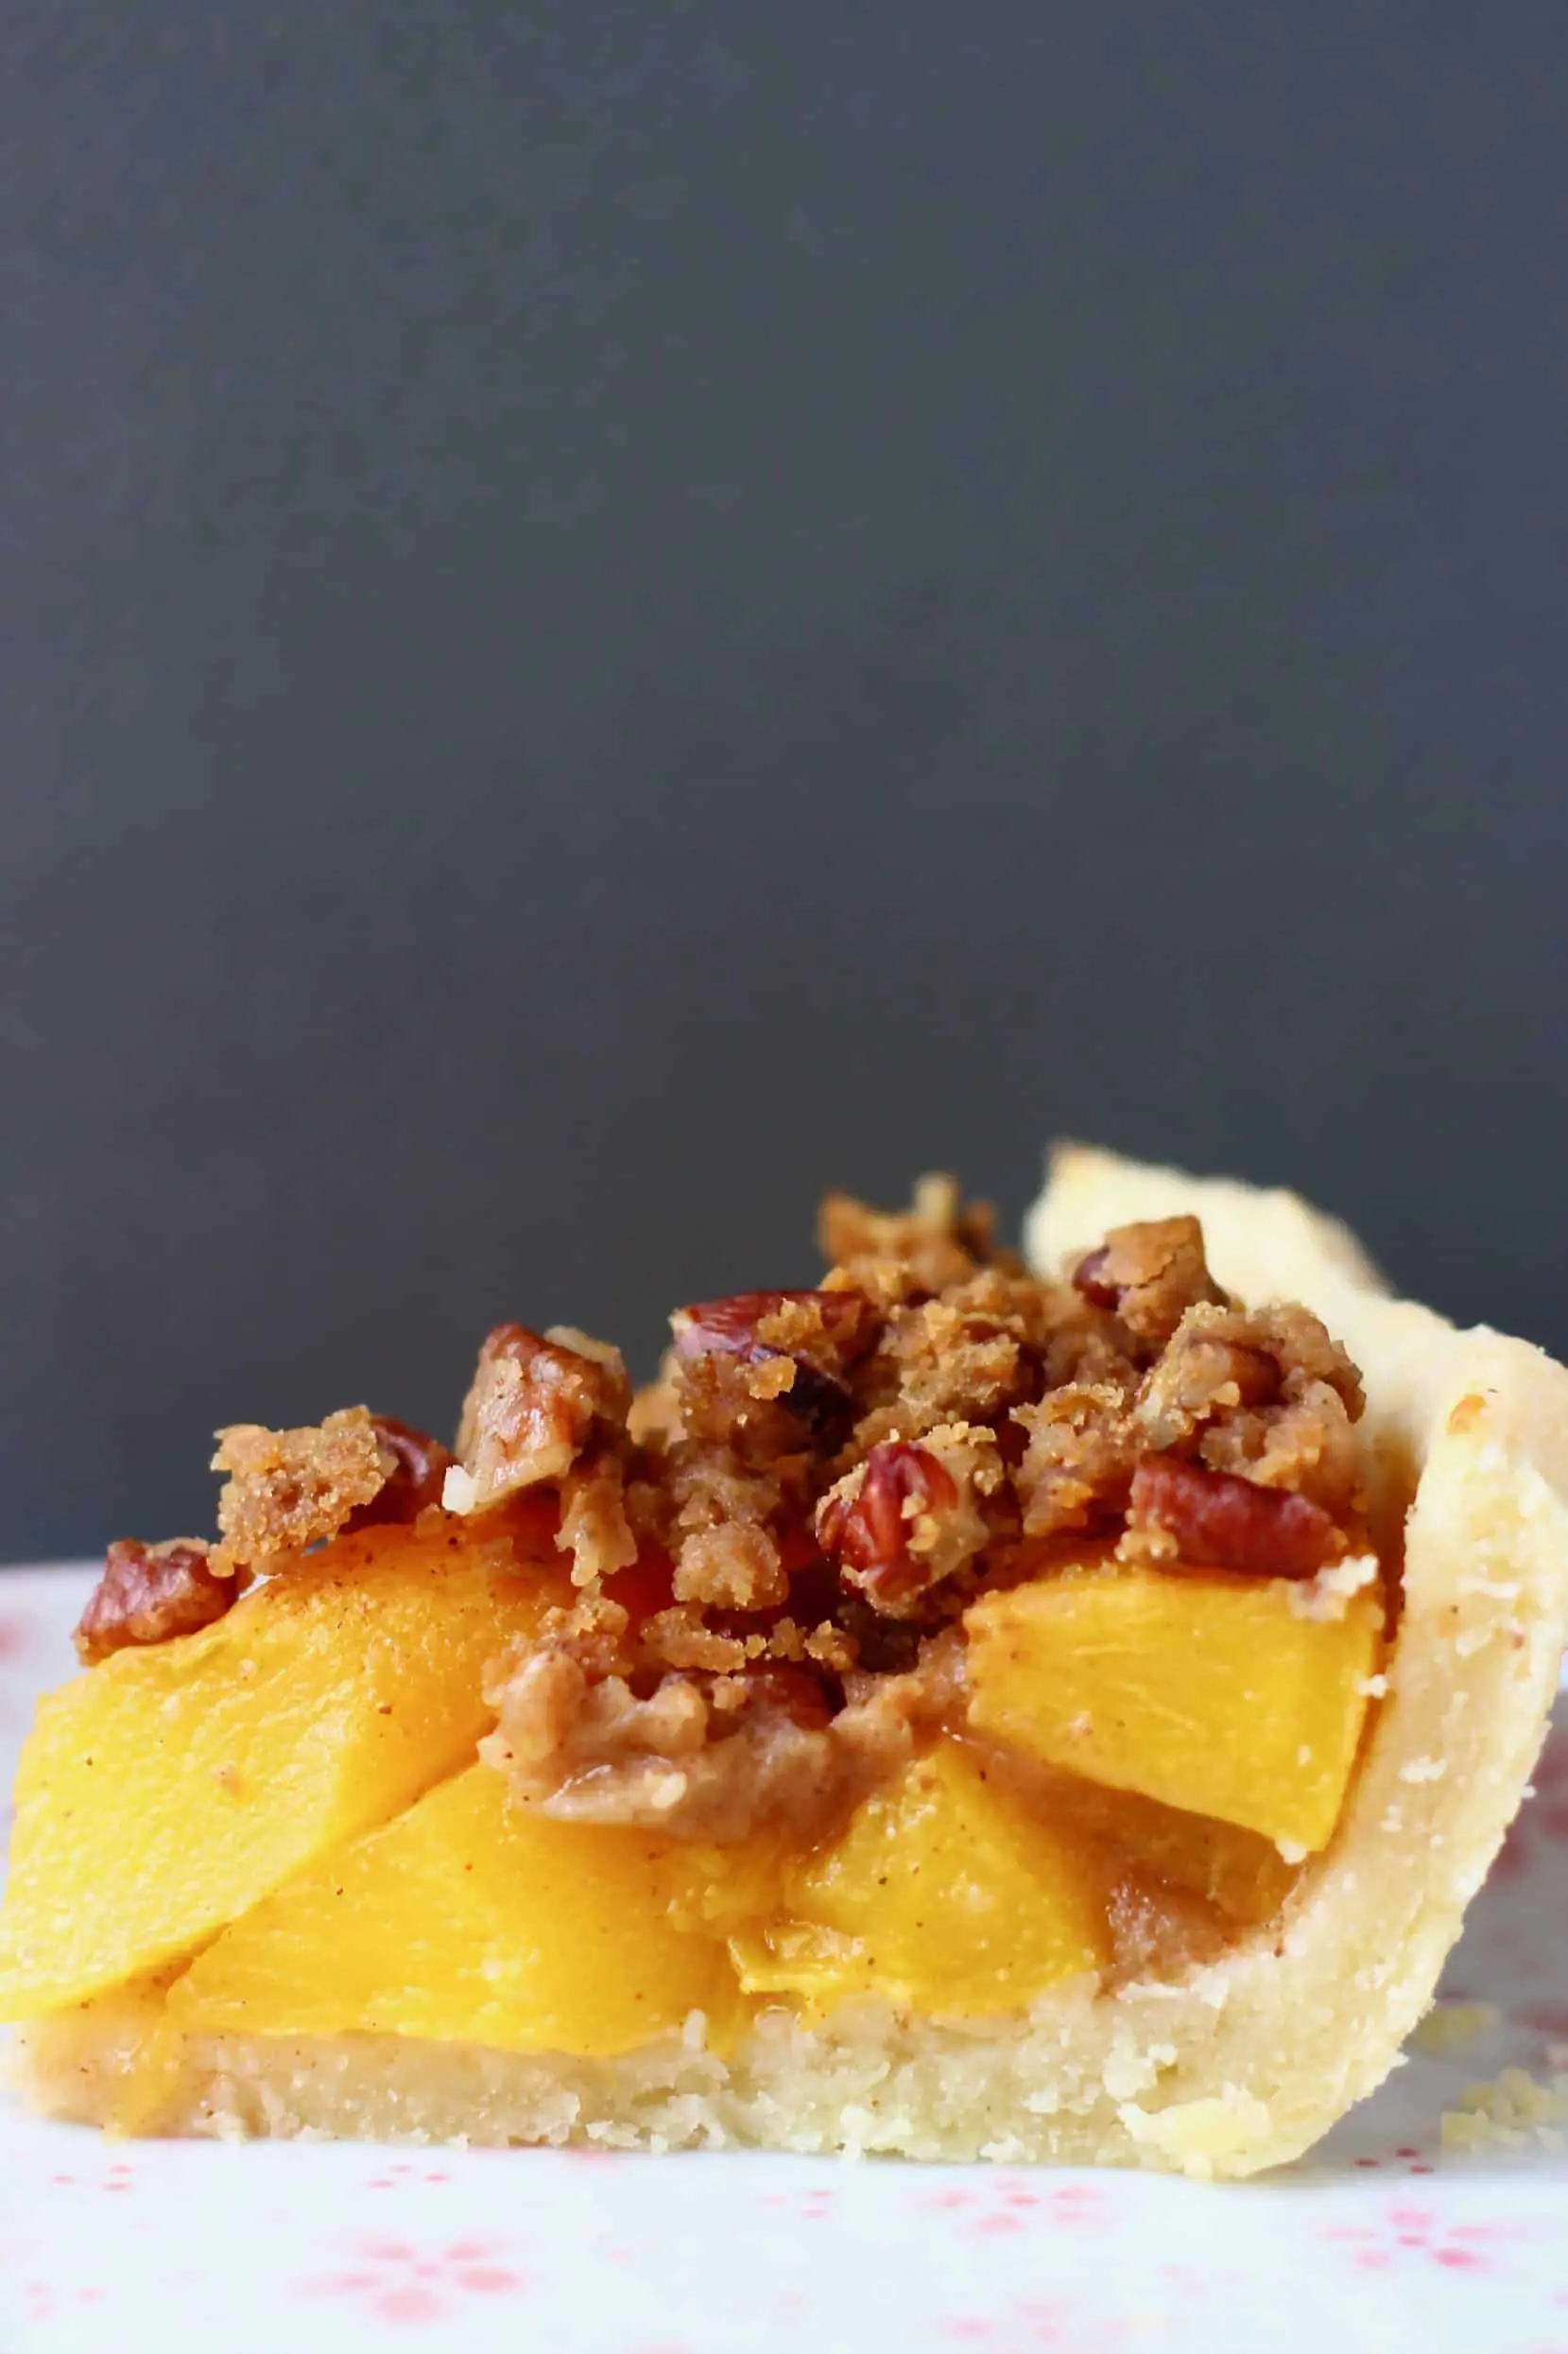 A slice of peach pie topped with brown crumble topping on a white plate